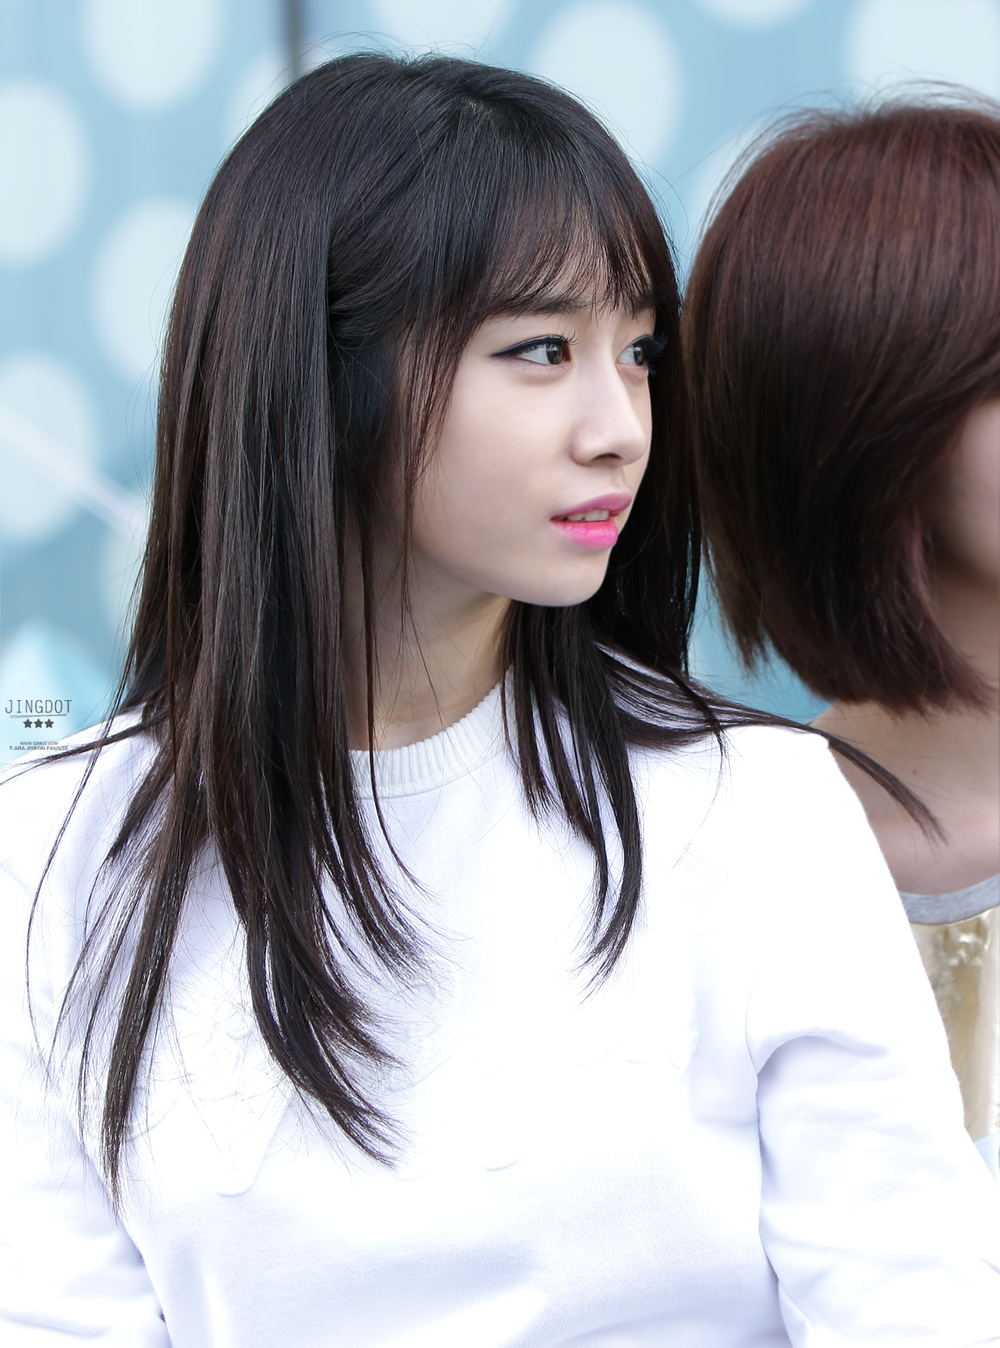 PICS [01.07.14] Jiyeon @ Party Camping Event 2243C34553EF77AD19697C